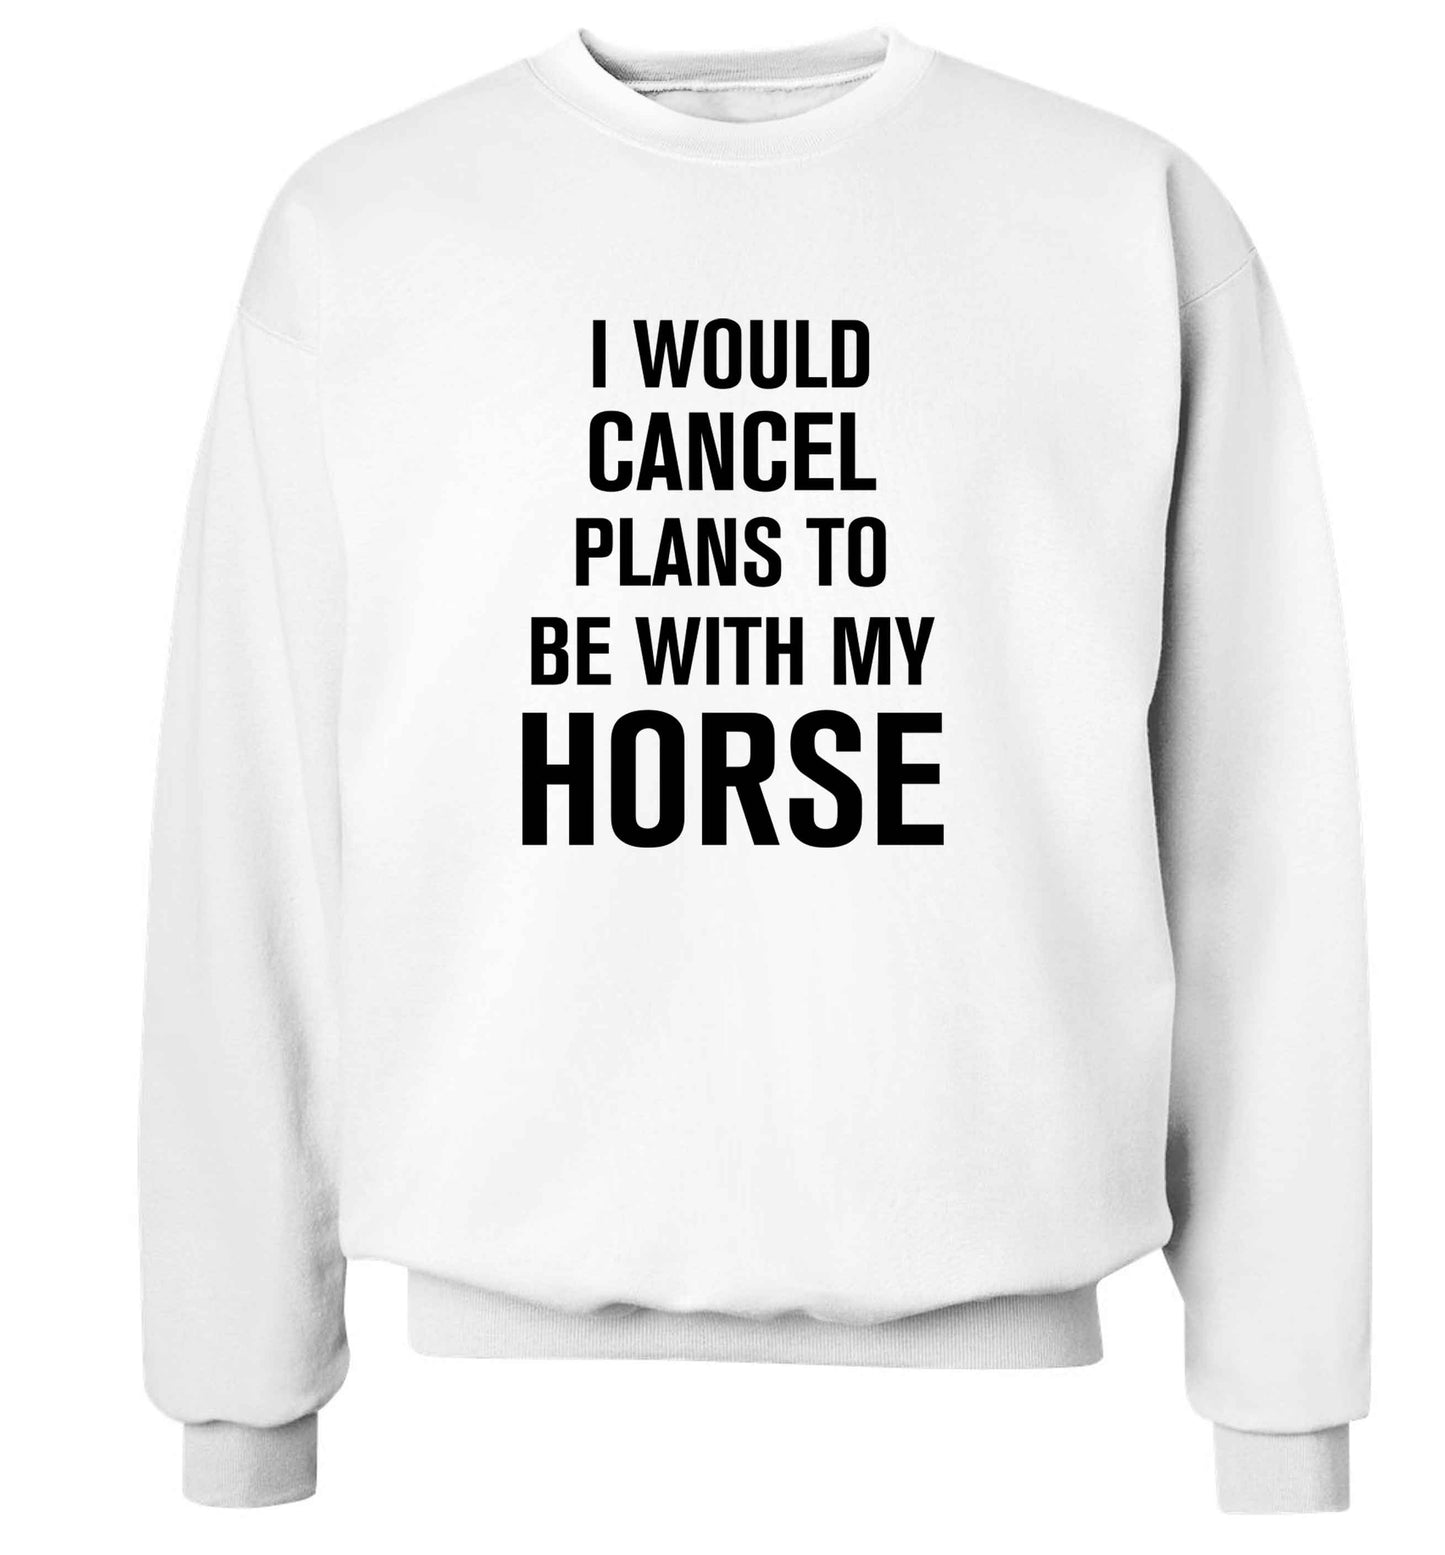 I will cancel plans to be with my horse adult's unisex white sweater 2XL